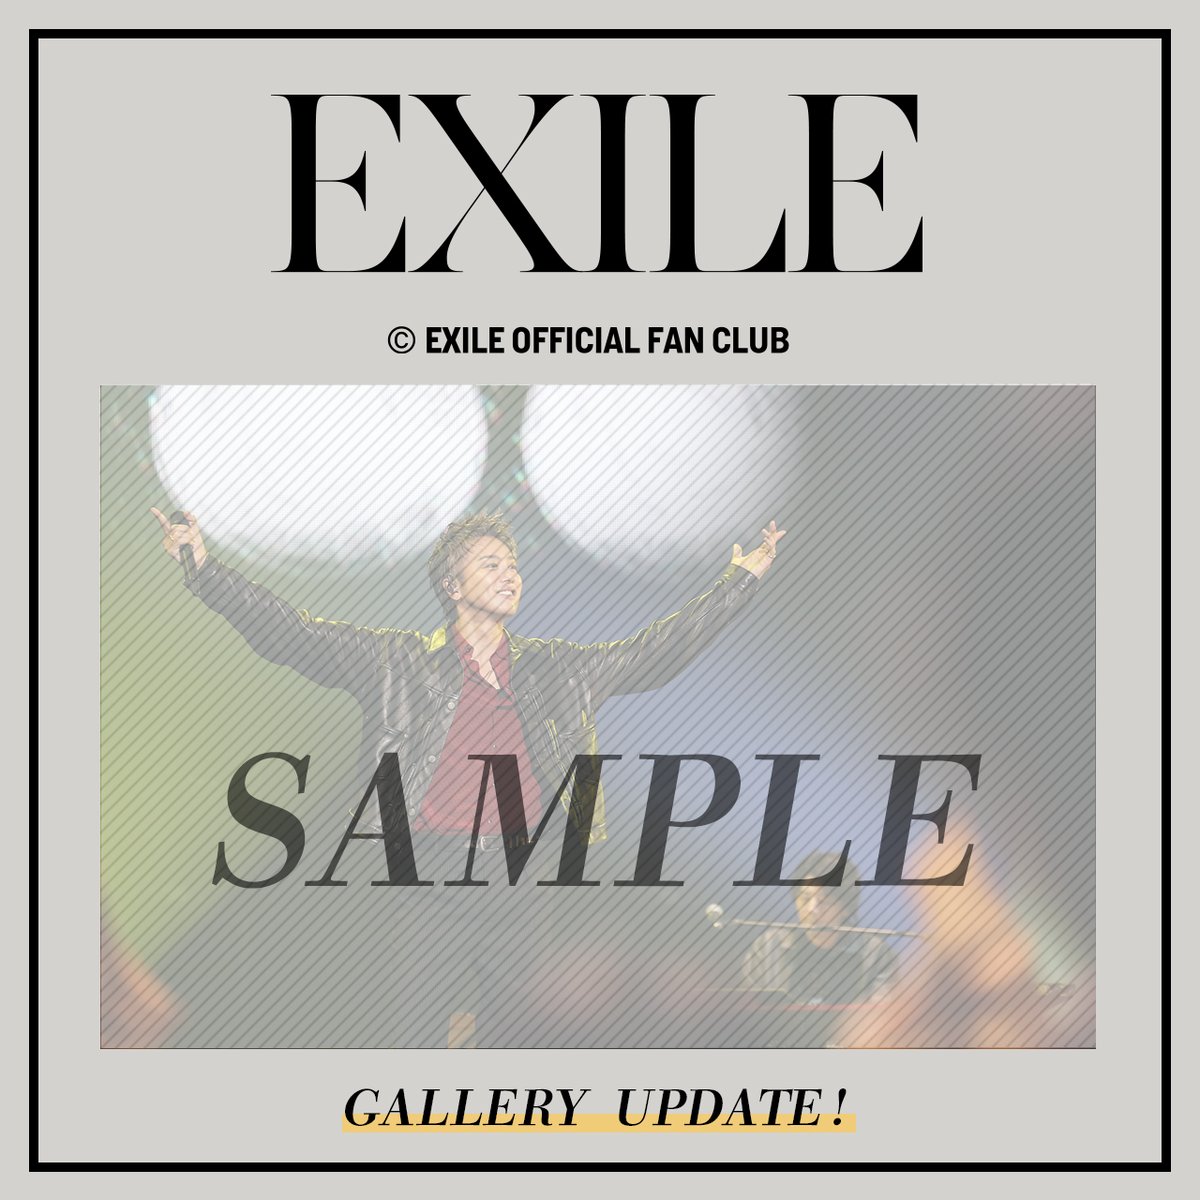 【EXILEOFFICIALFANCLUB 限定】
《　'GALLERY更新'　》

『EXILE TAKAHIRO 武道館 LIVE 2023 'EXPLORE'』
LIVE DVD/Blu-rayのリリースを記念して
LIVE PHOTOを公開中です。
是非、チェックしてください。

exile.exfamily.jp/s/ldh01/diary/…

Staff